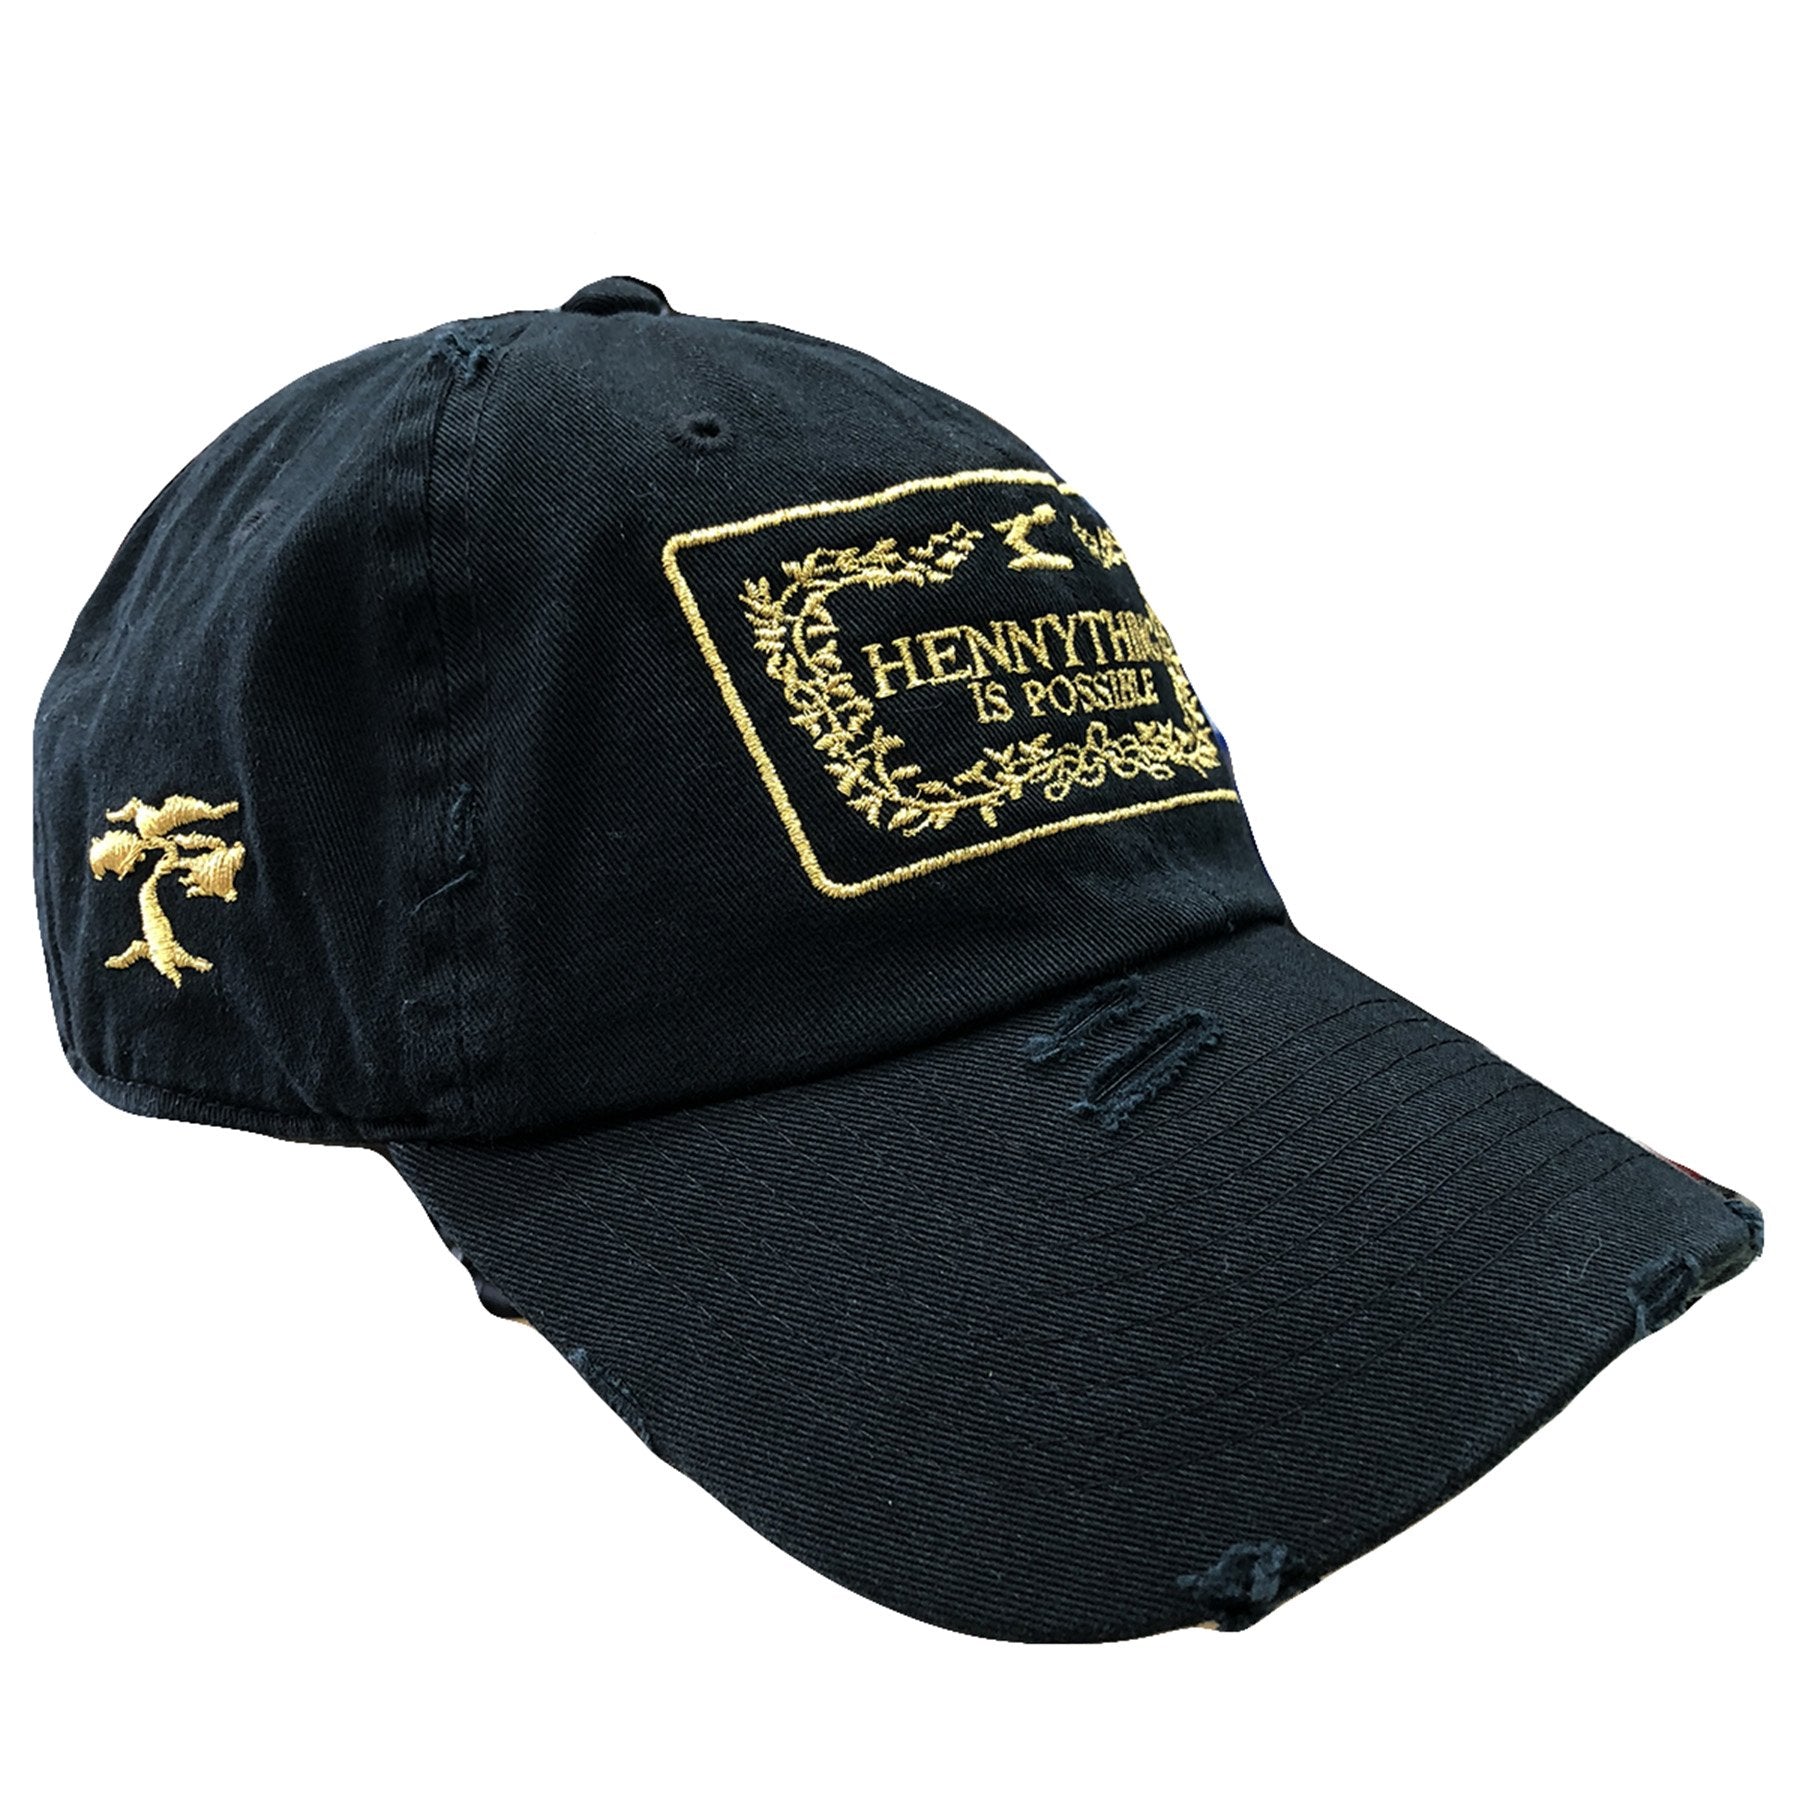 Embroidered on the right side of the Hennything is Possible black distressed dad hat is the Foot Clan bonsai tree embroidered in metallic gold thread